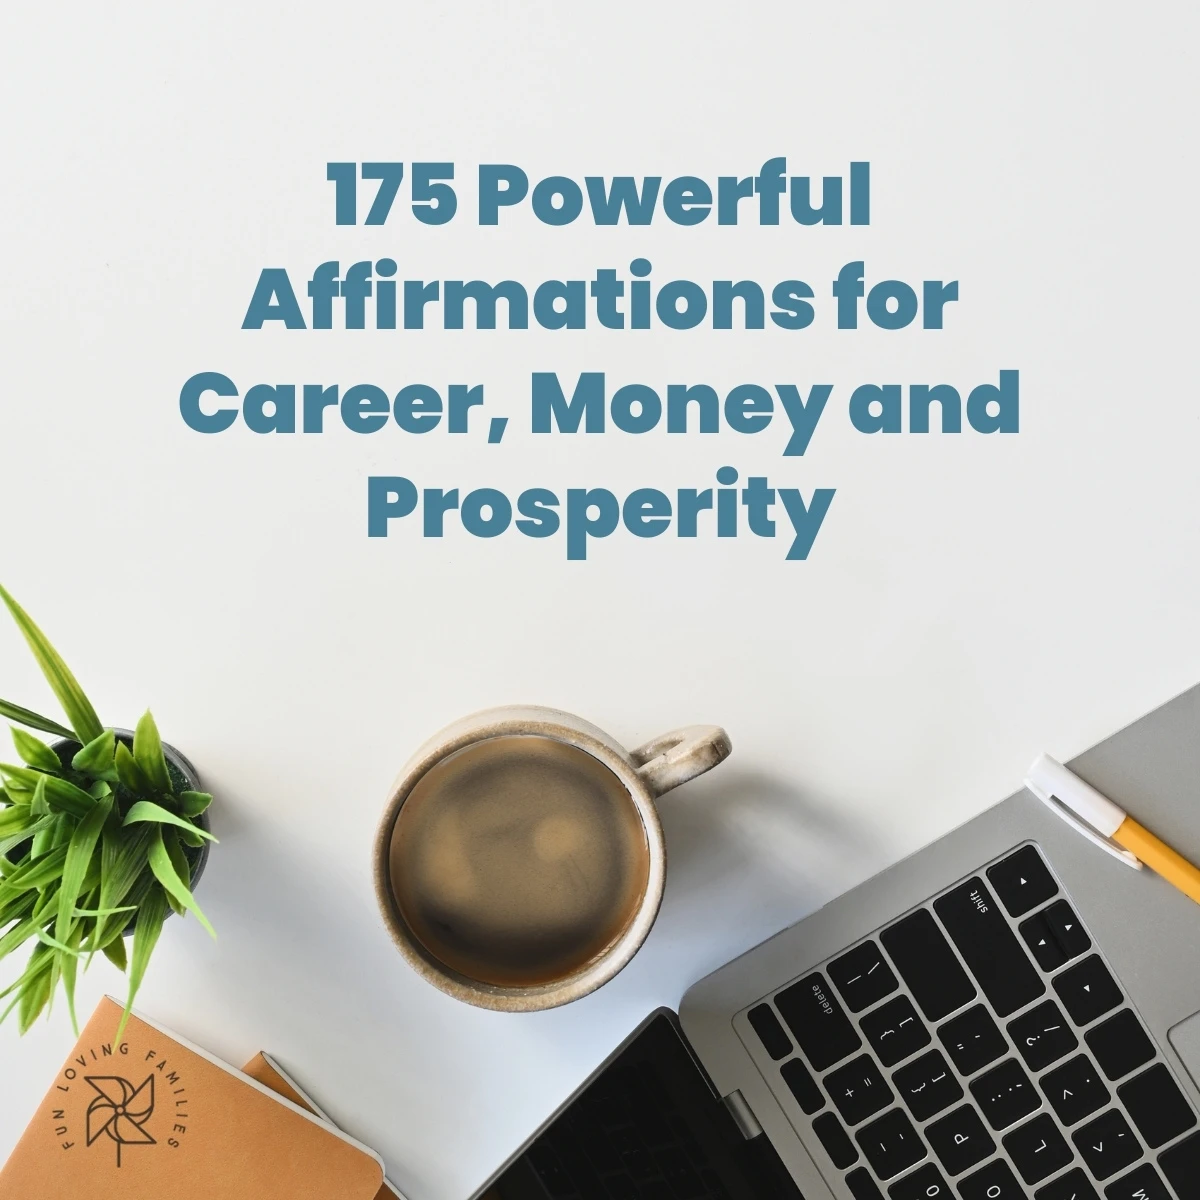 Affirmations for Money, Wealth, Prosperity and Career